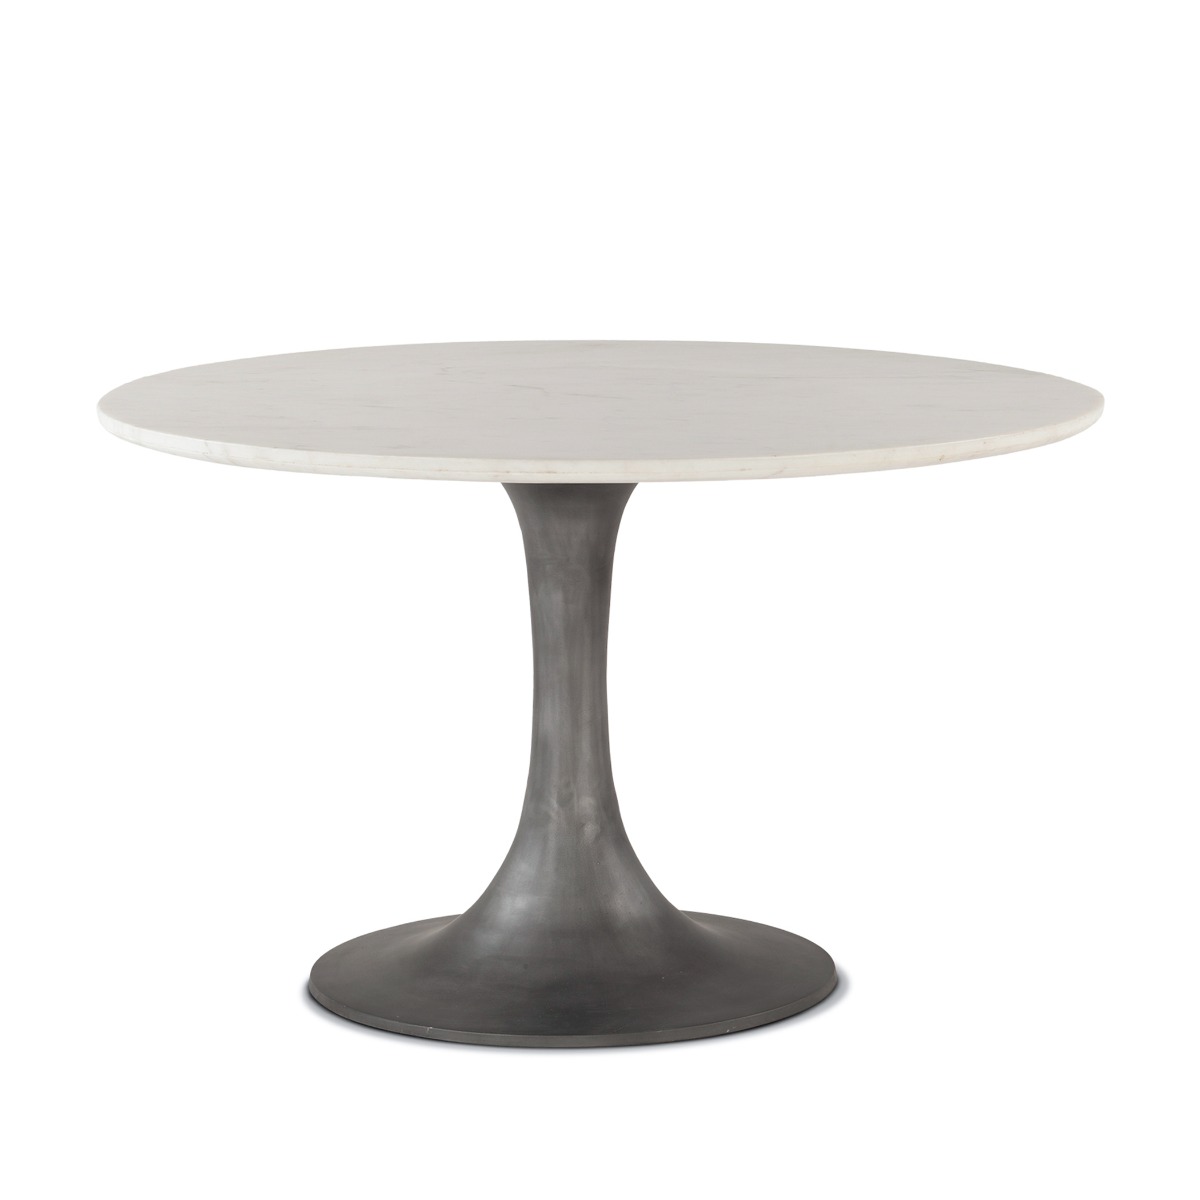 Image of Palm Springs 48" Round Dining Table White Marble